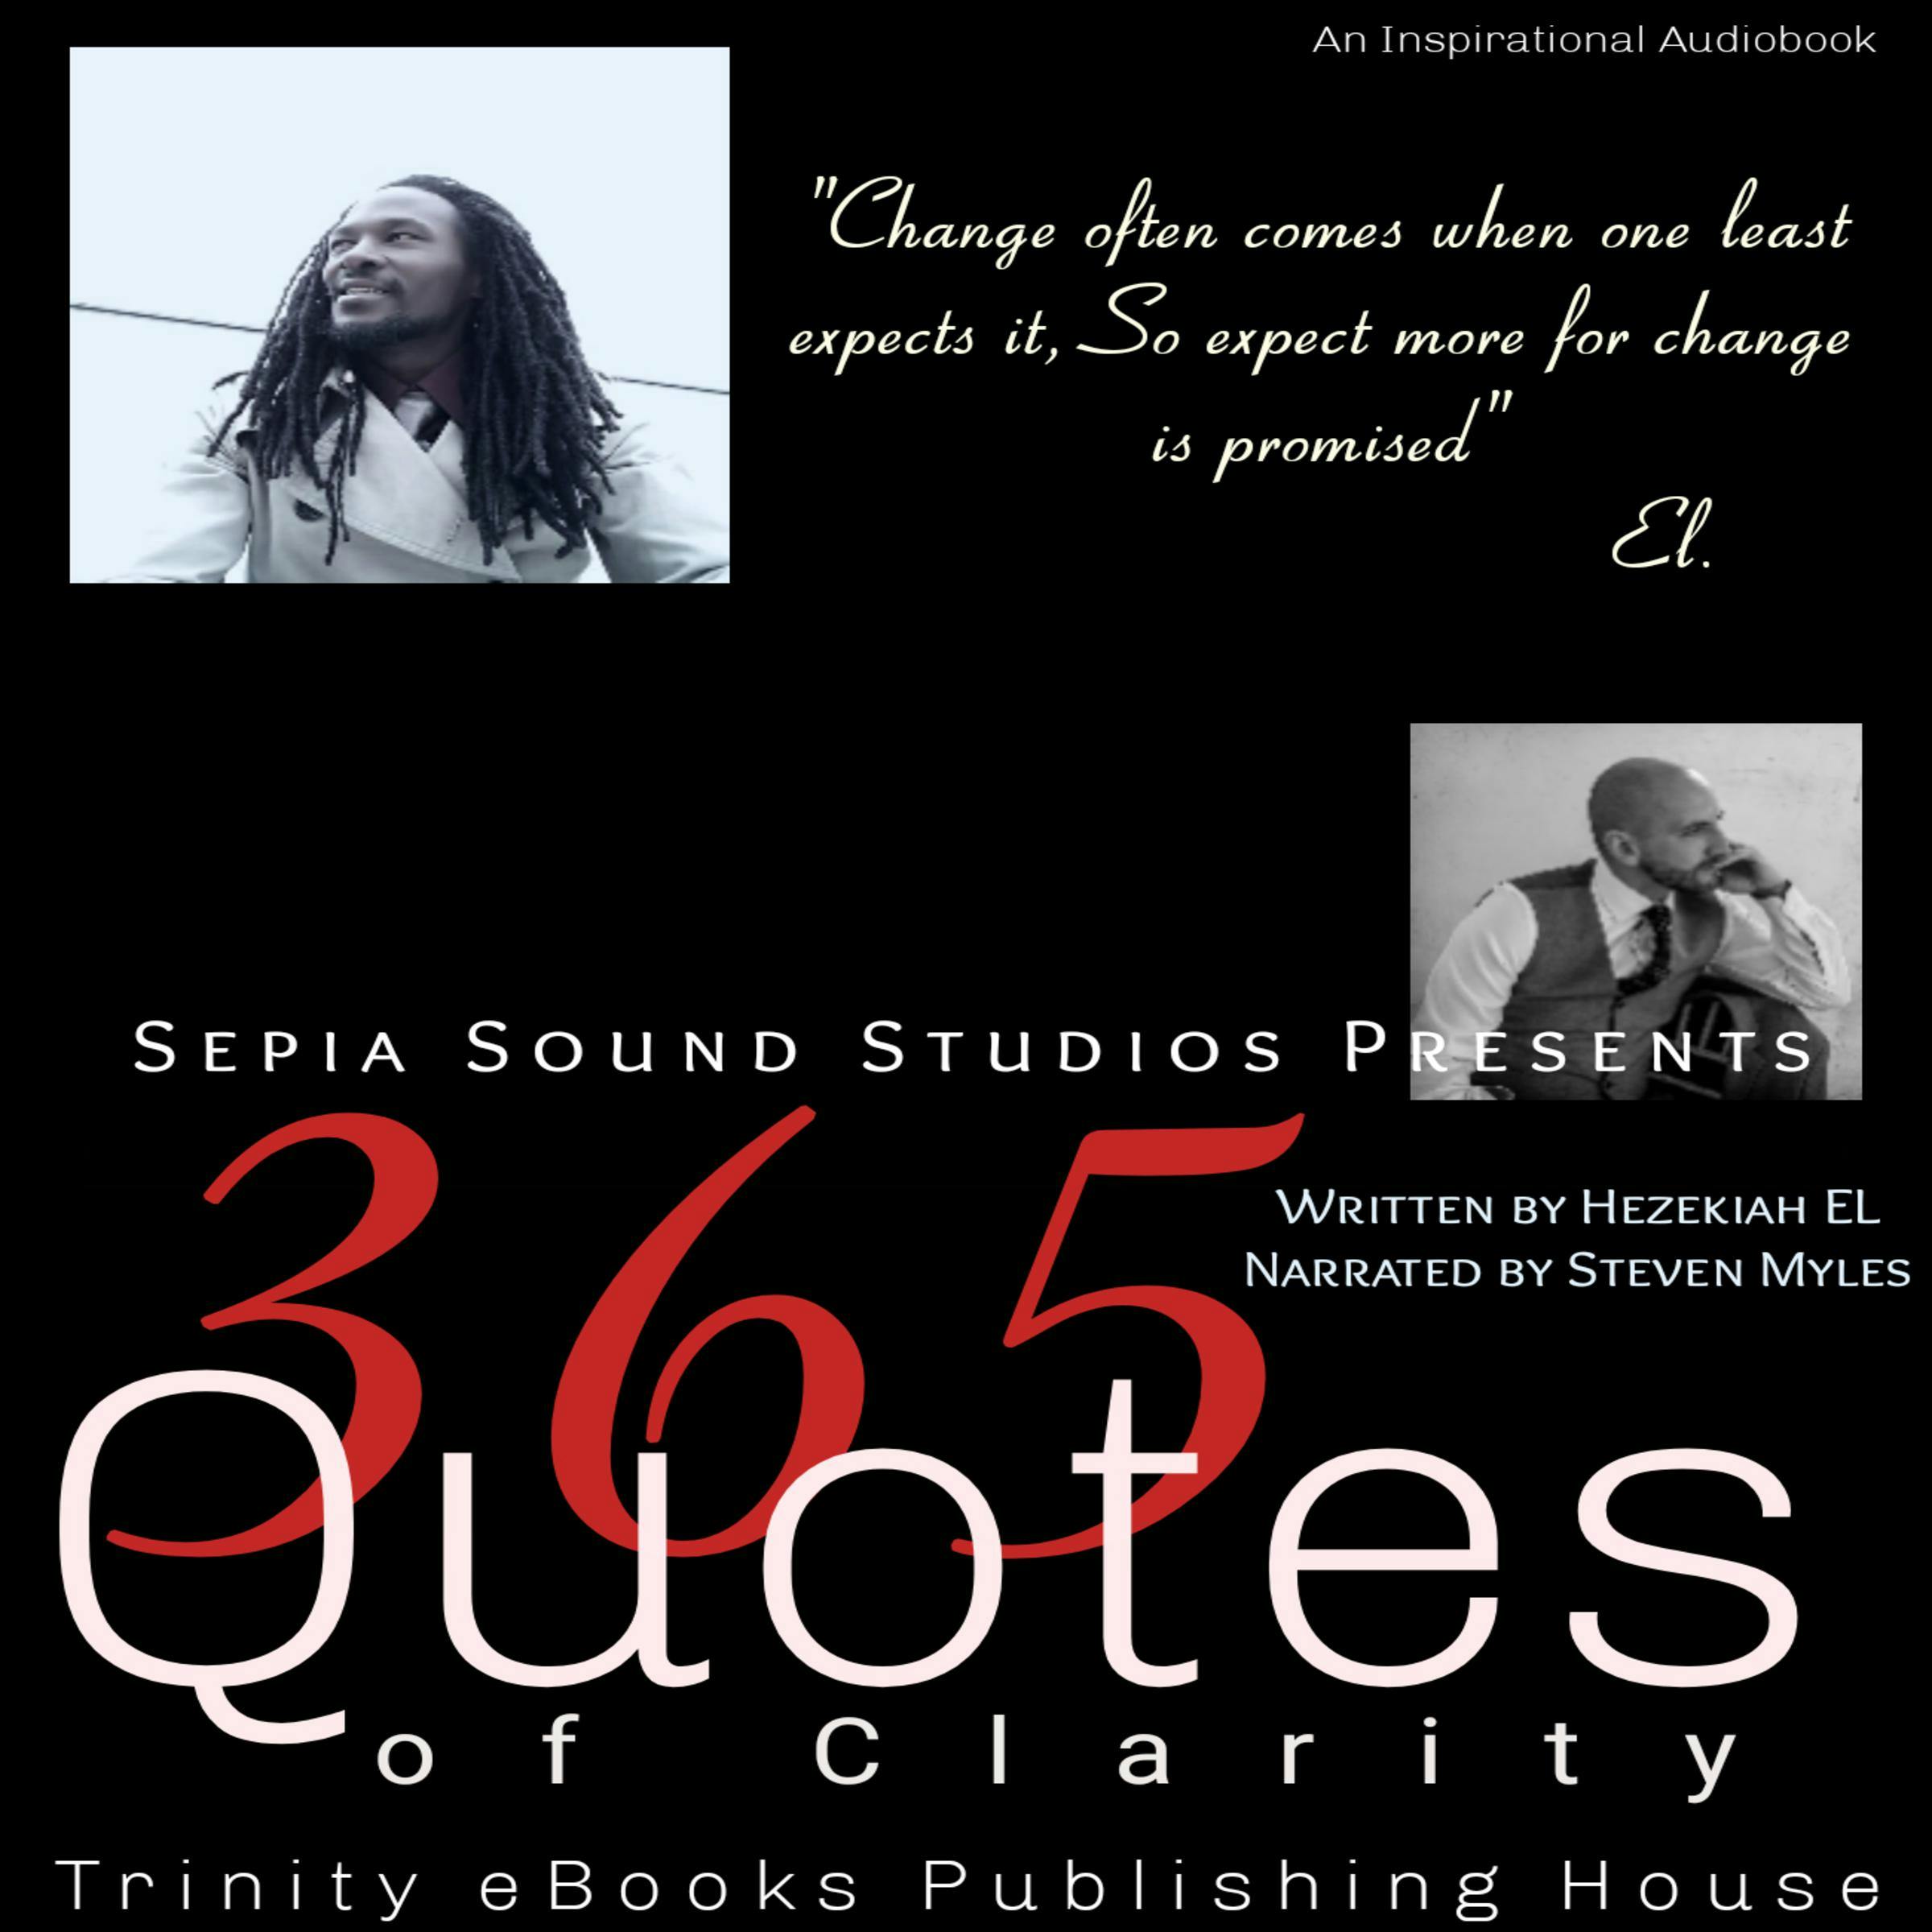 365 Quotes of Clarity: audio version narrated By Steven Myles - undefined